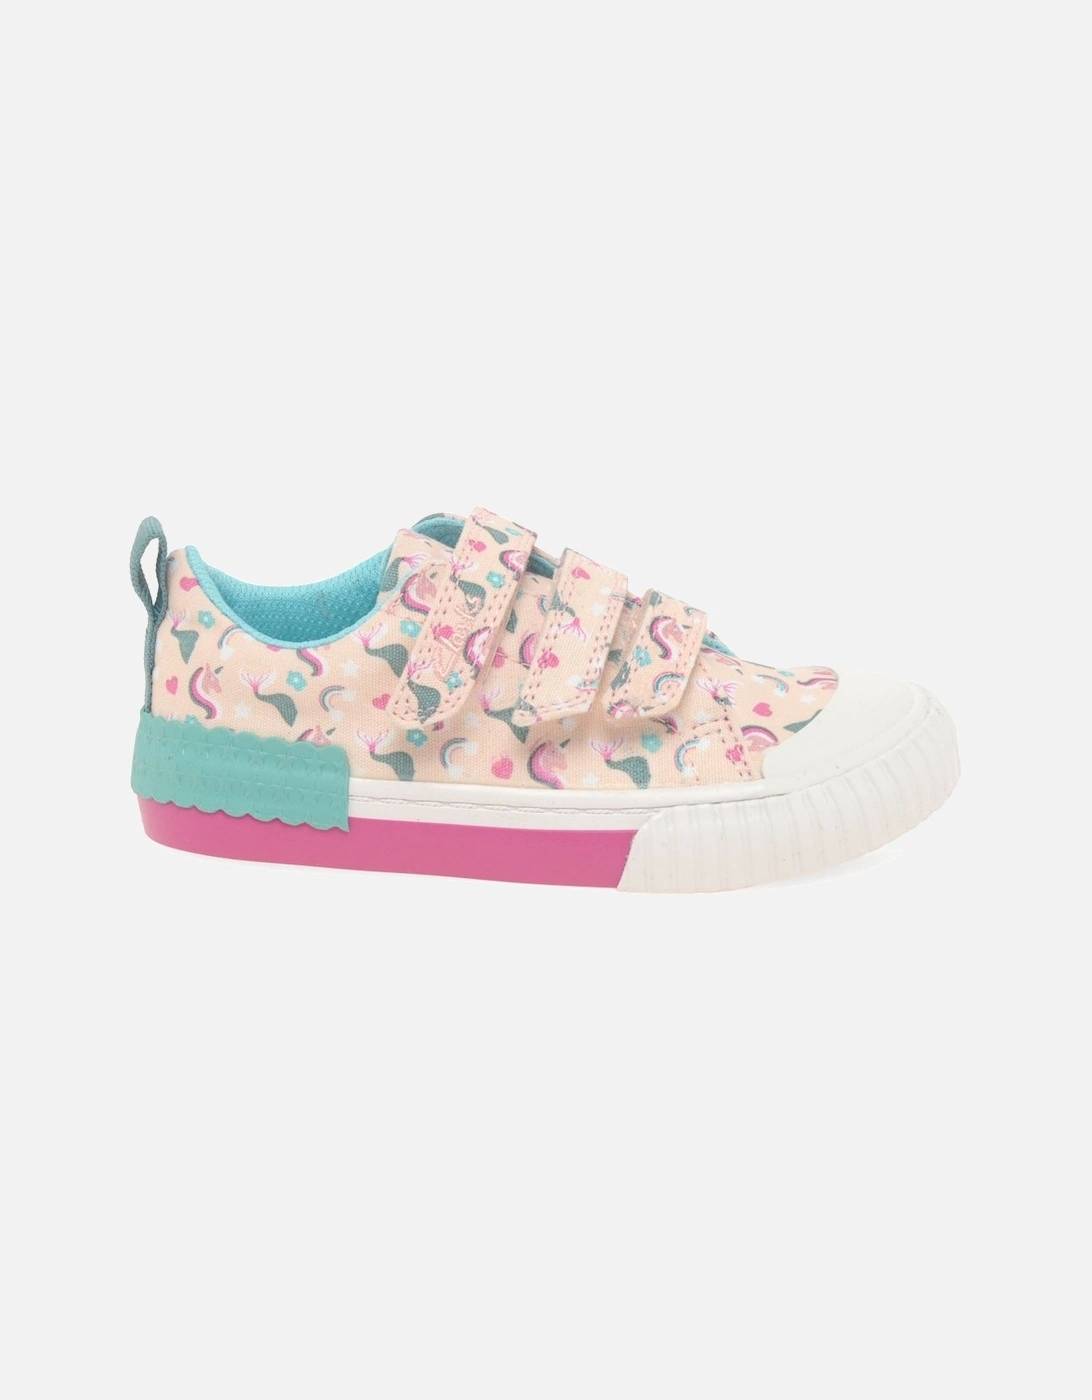 Foxing Myth K Girls Canvas Shoes